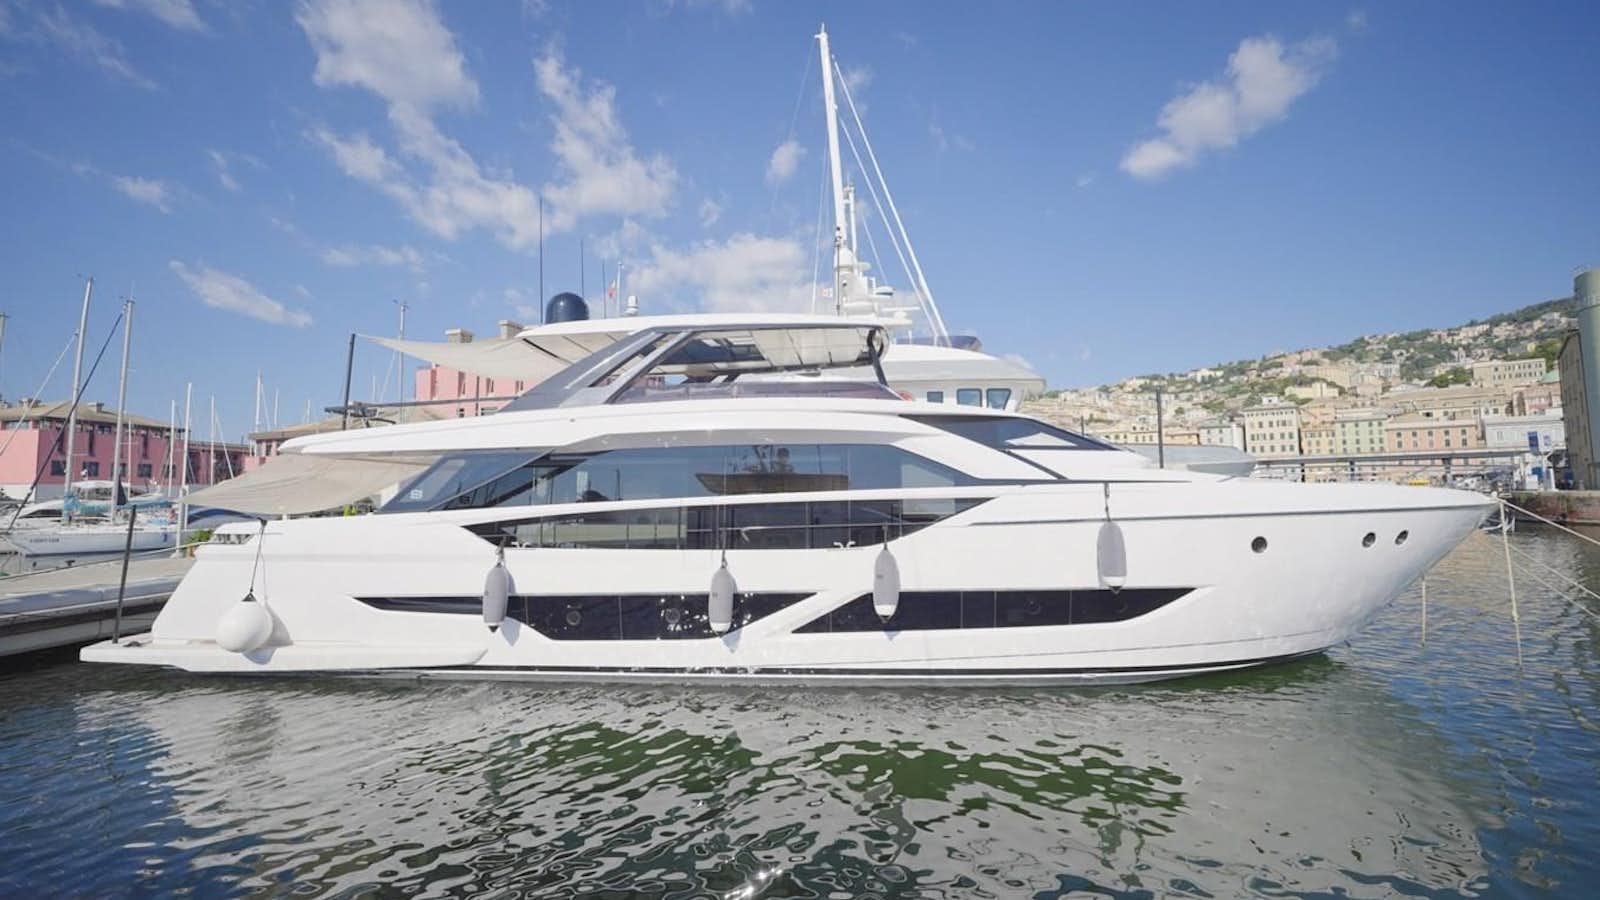 Watch Video for ASMARA Yacht for Sale